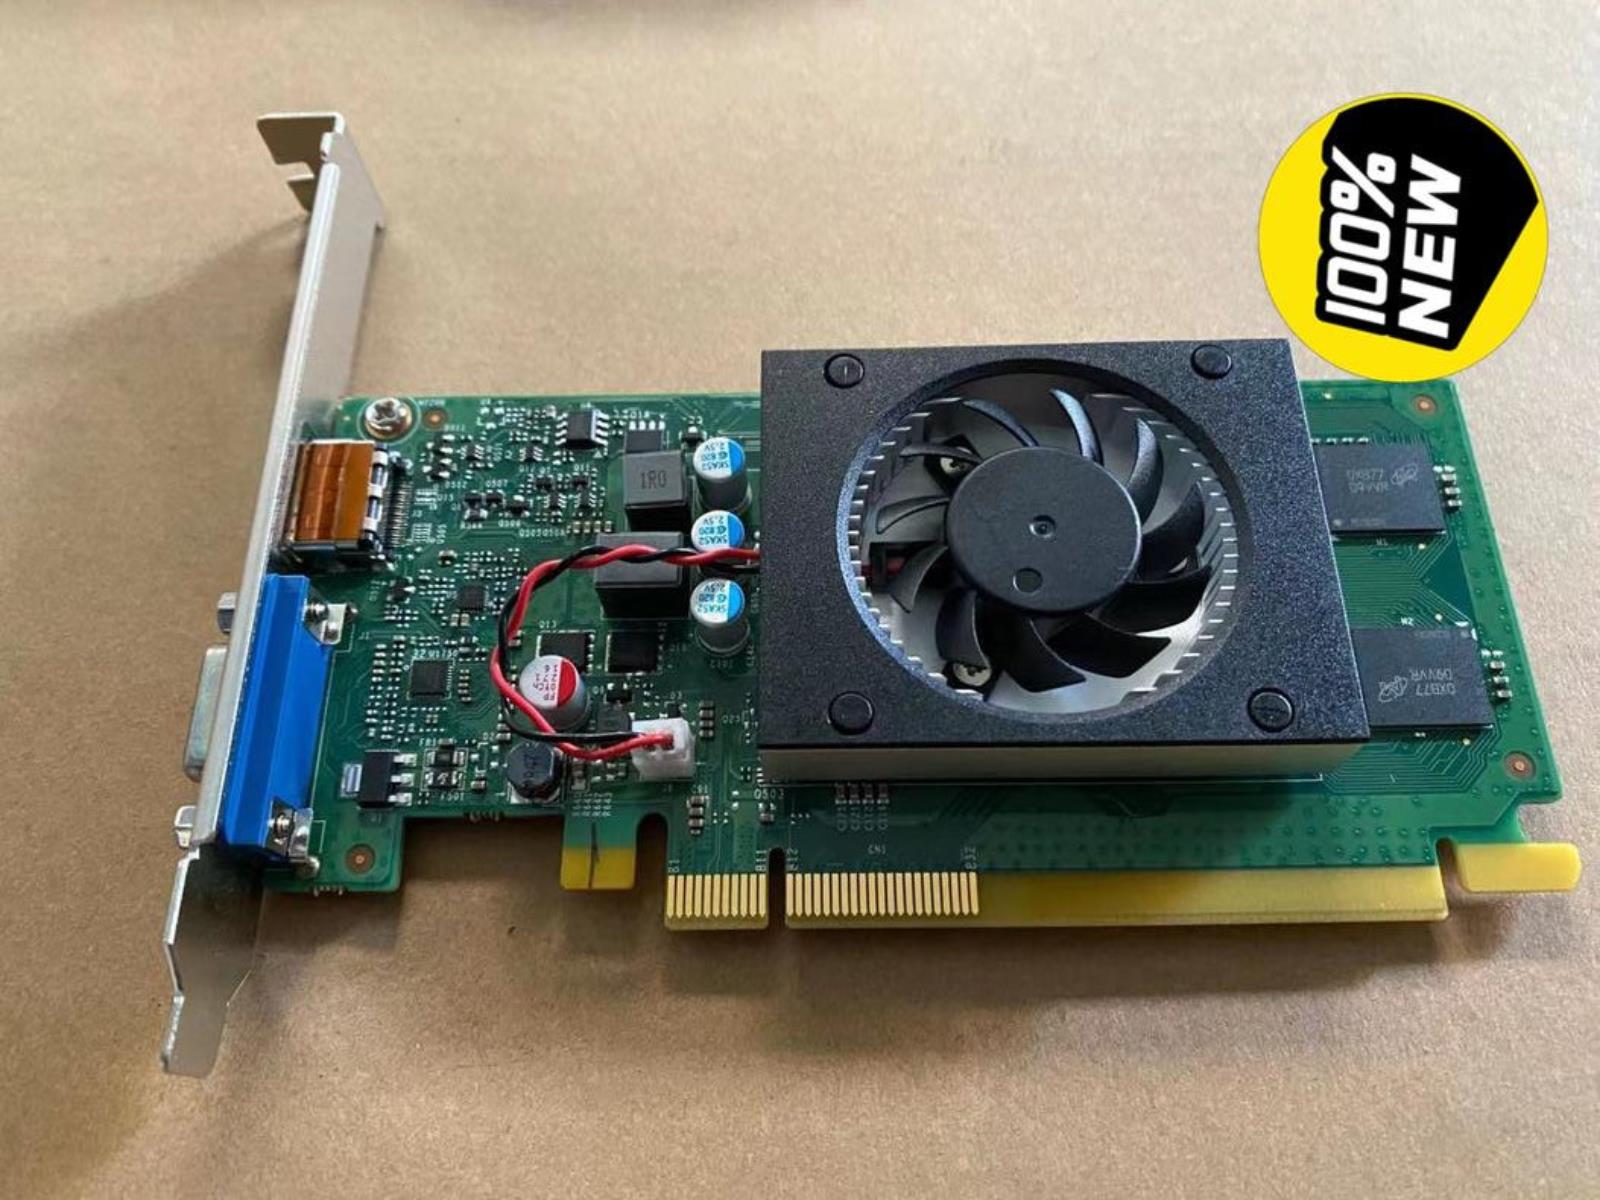 This is the GeForce GT 1010. Take a look at the photos and the performance of the "graphic joke"